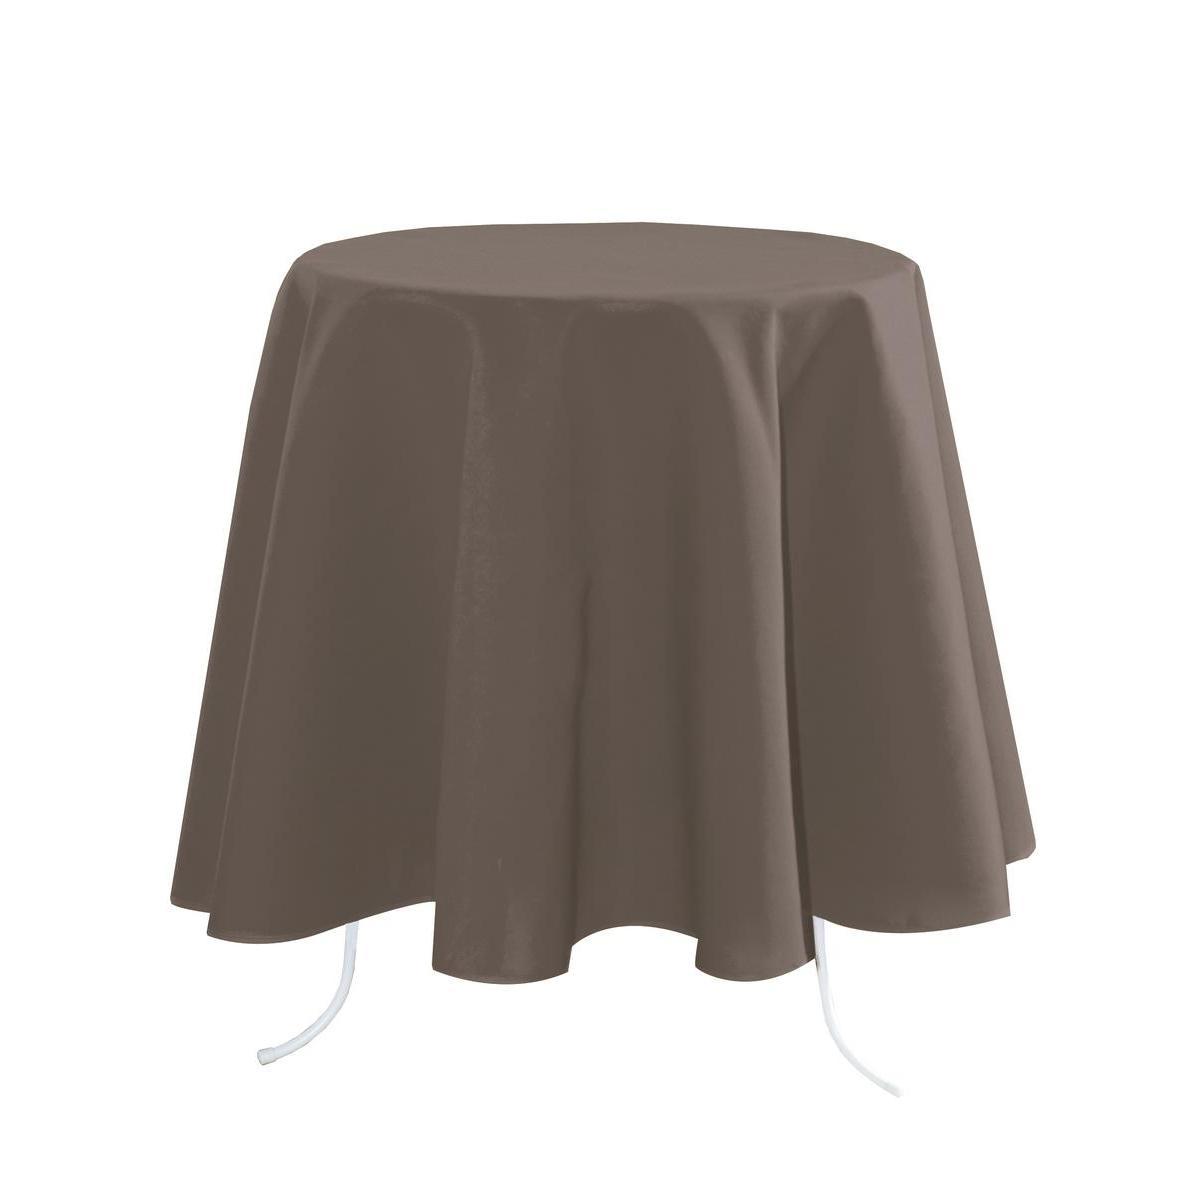 Nappe ronde - 100 % Polyester - Ø 160 cm - Marron taupe